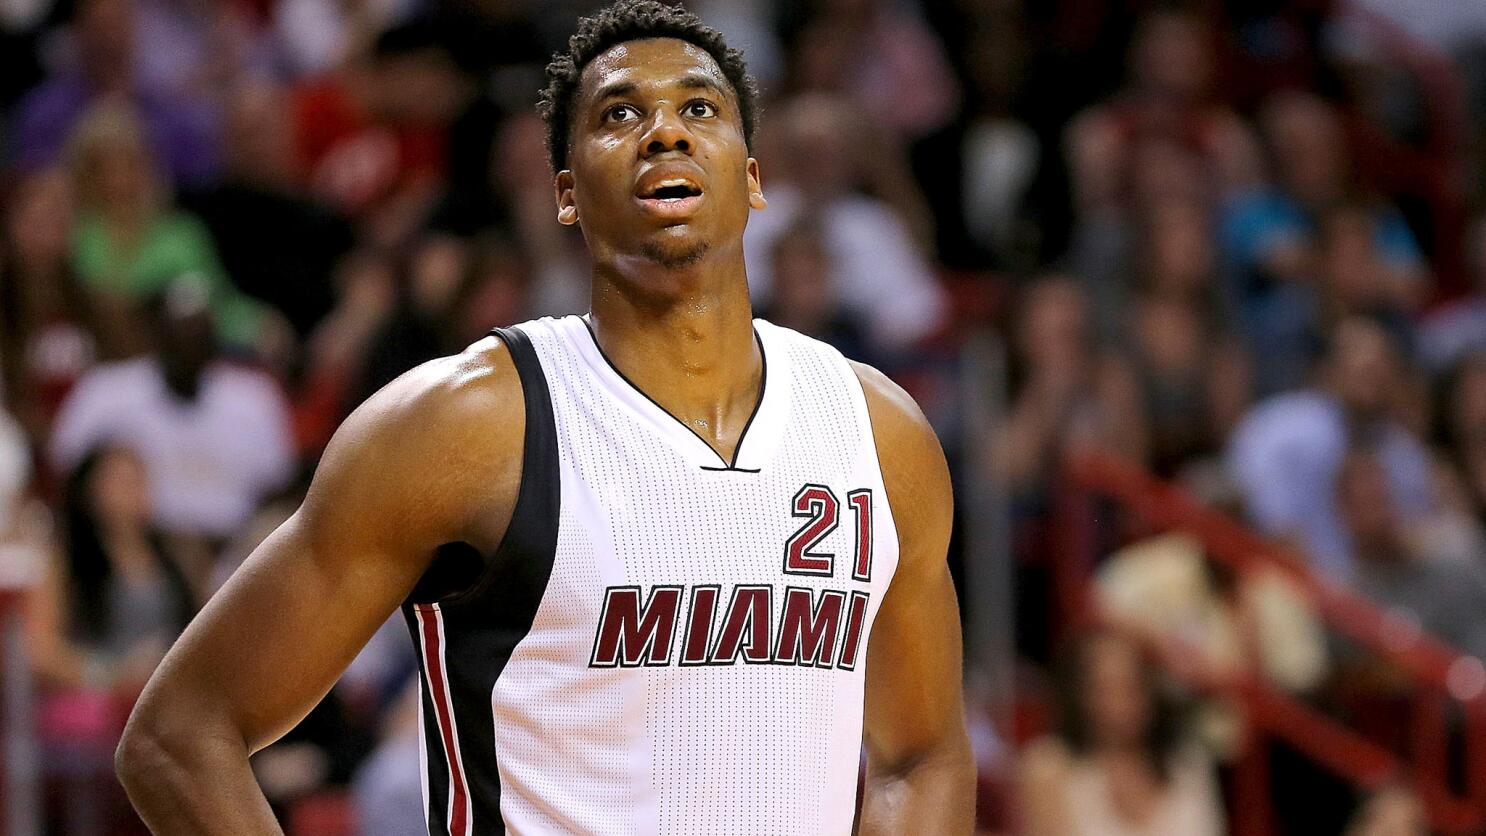 Was the Hassan Whiteside trade good for the Portland Trail Blazers? We  discuss that and the other Blazers' moves on 3-on-3 Blazers podcast